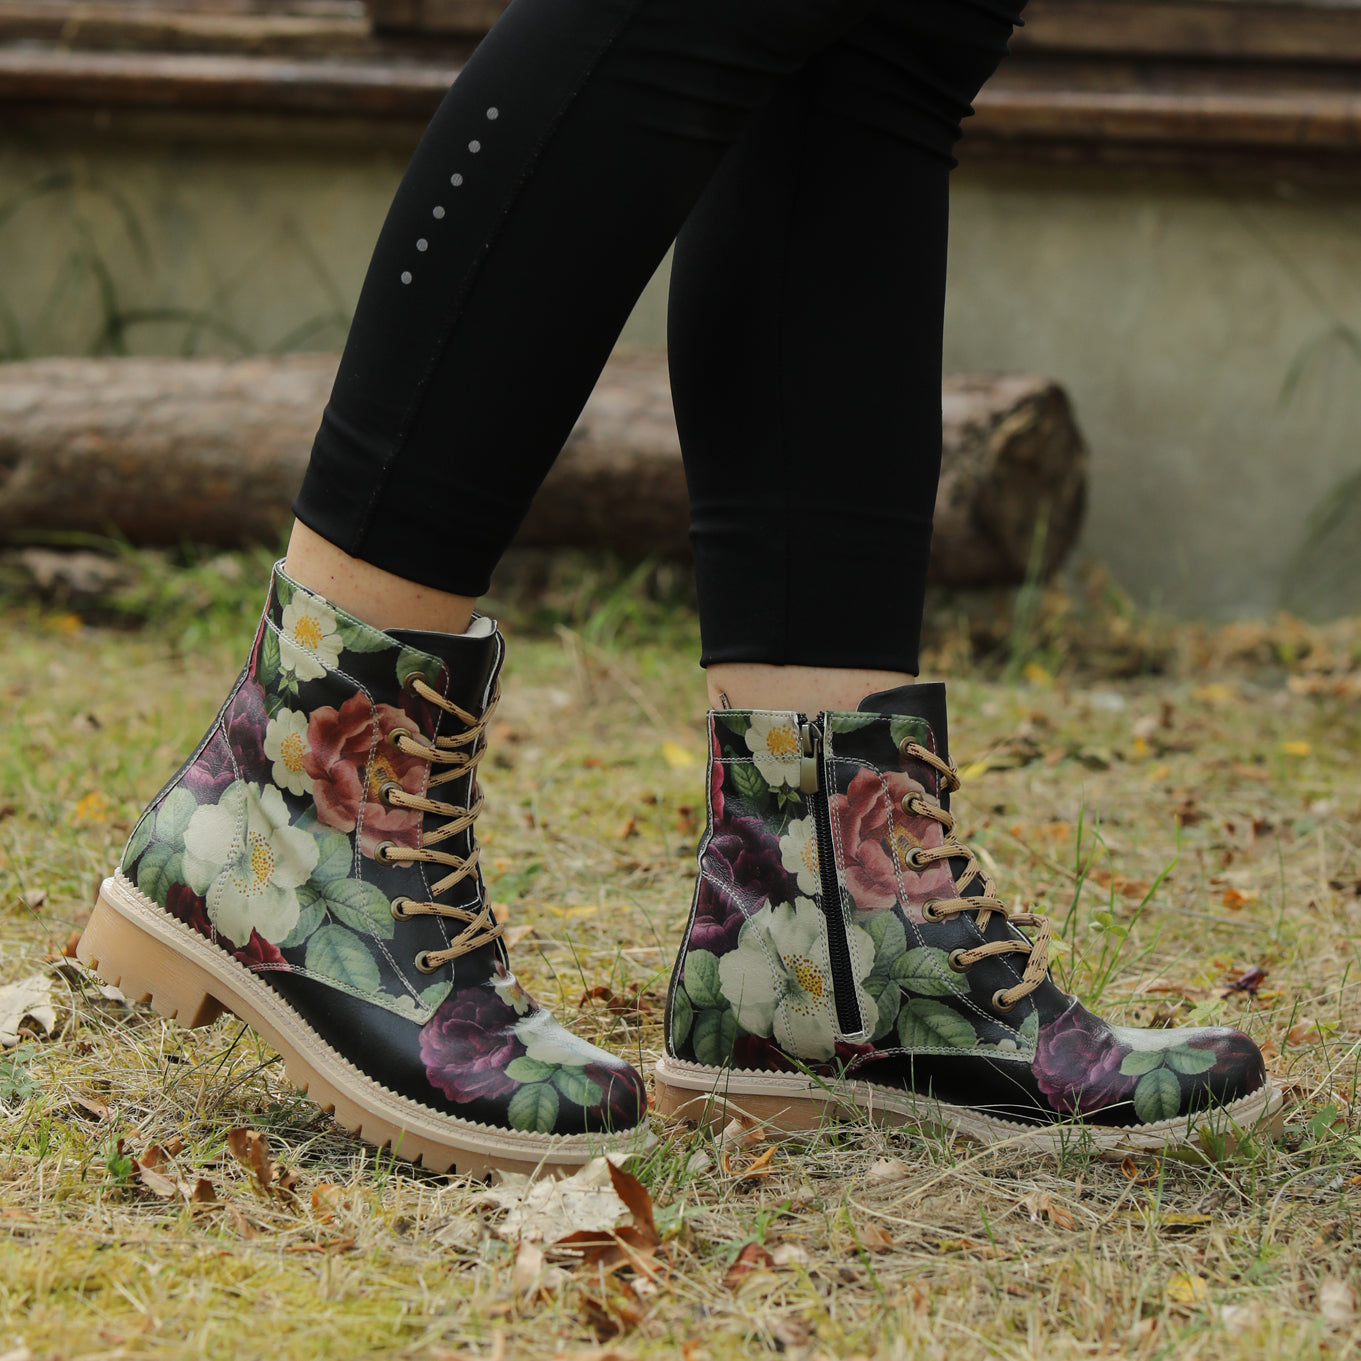 Spring Bloom Printed Lace-up and Side Zippered Women's Vegan Boots, Wearable Art with Unique Design